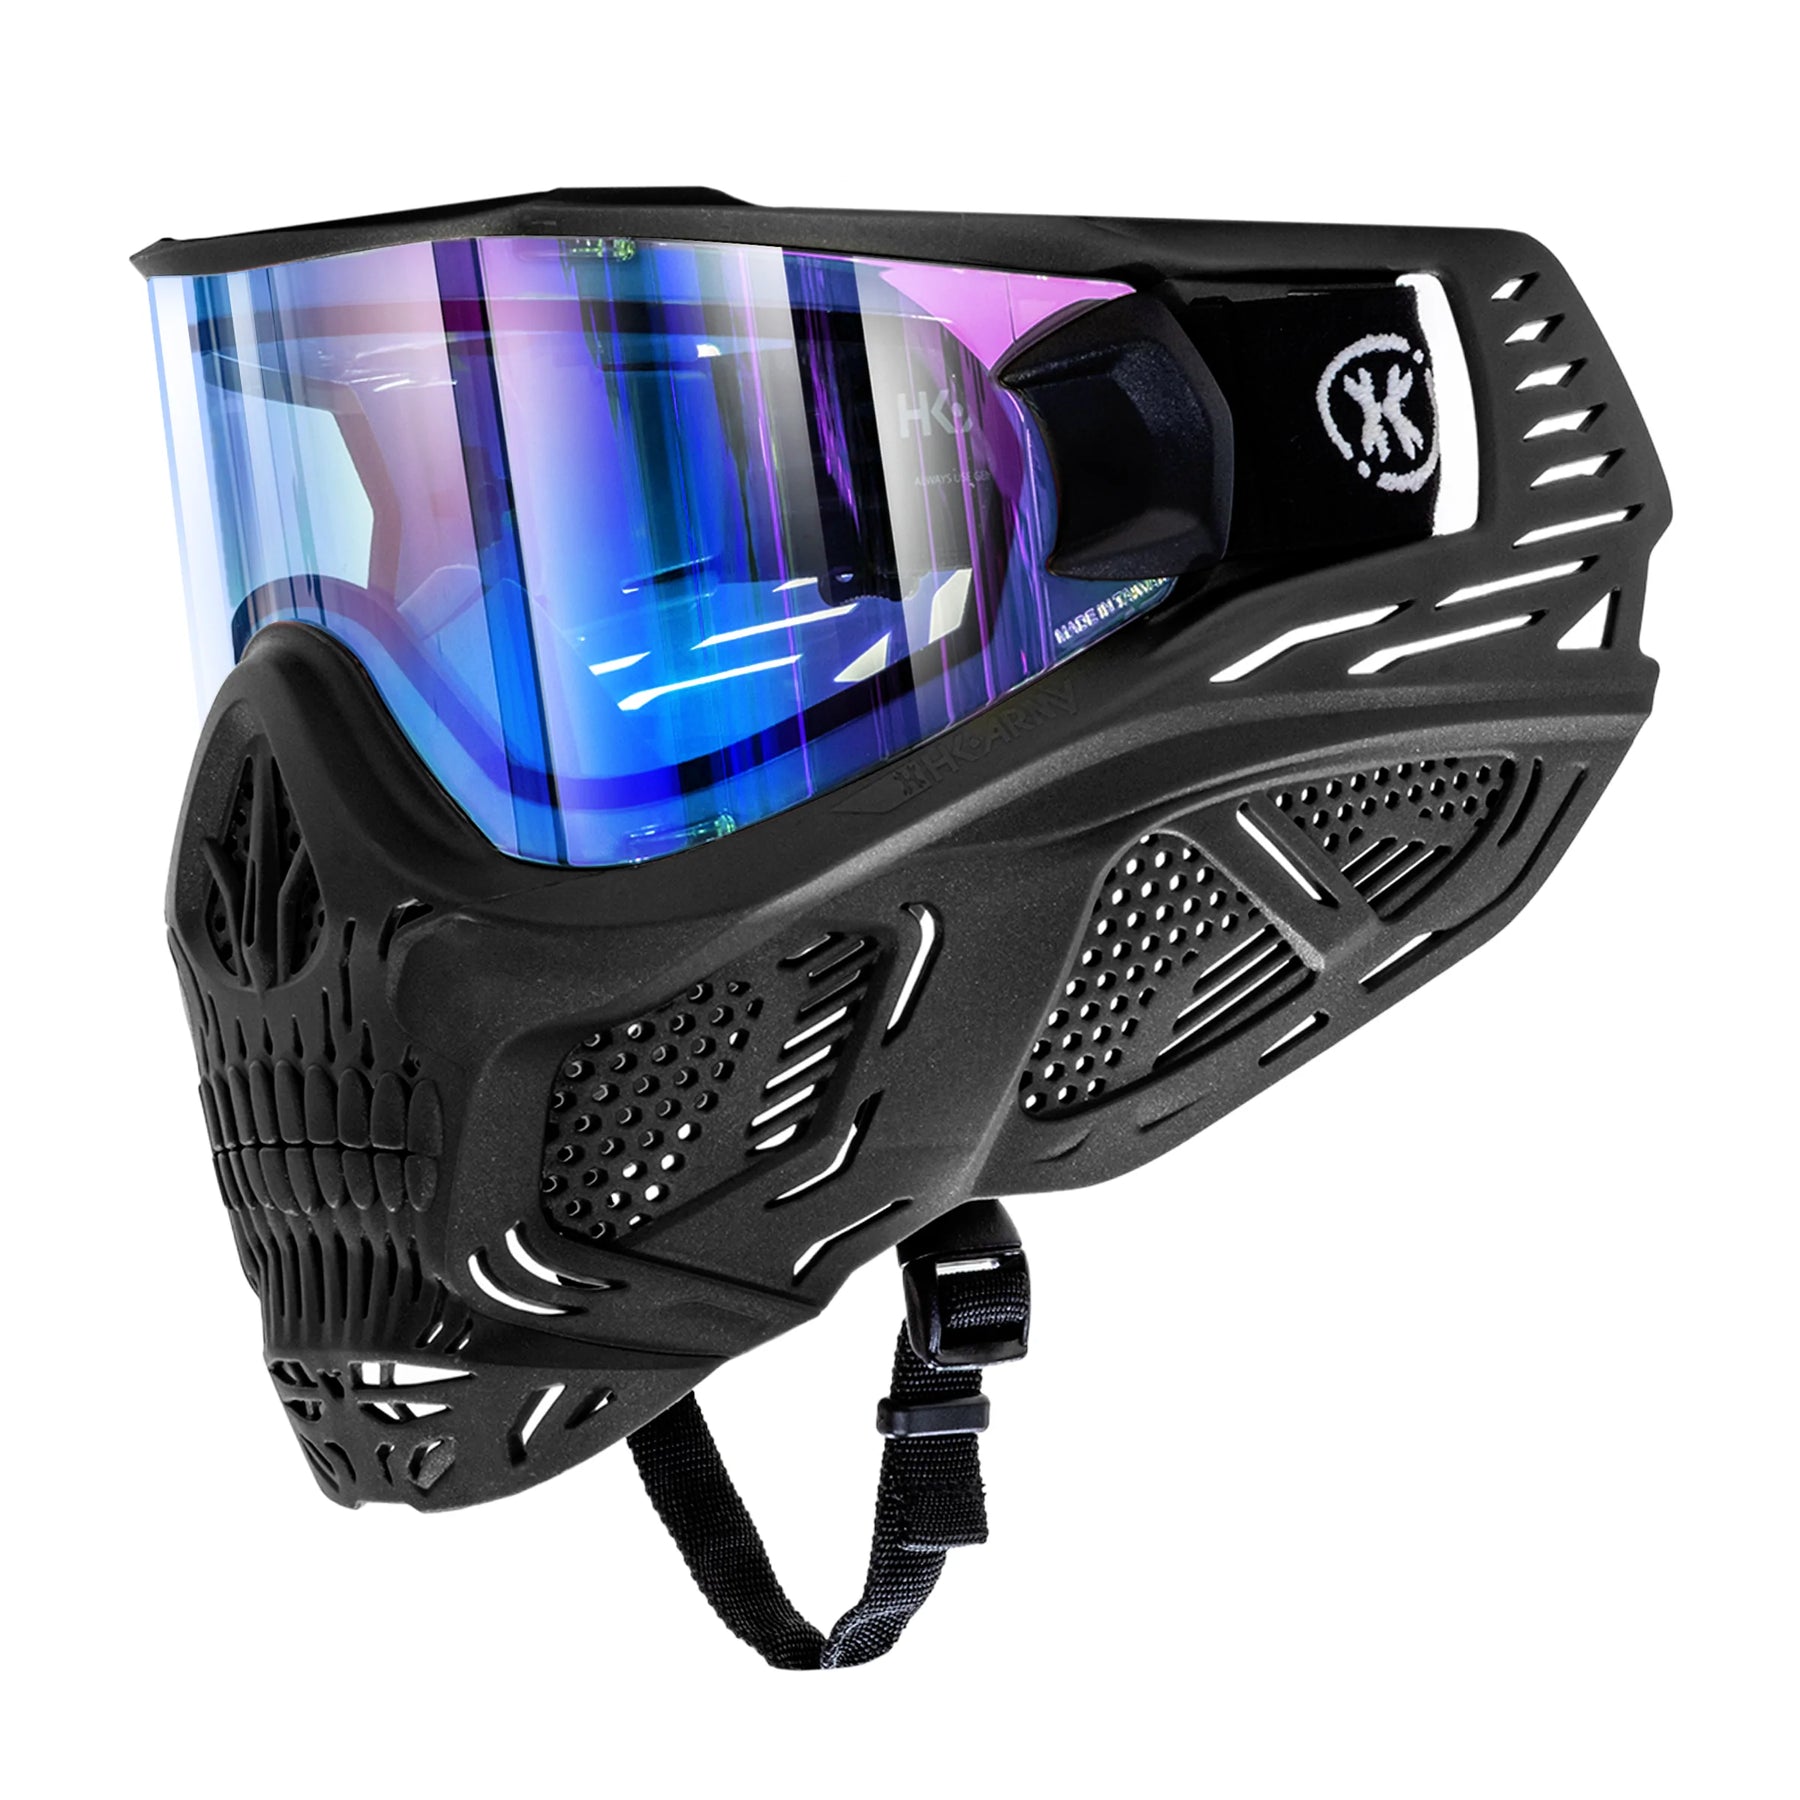 Hstl Skull Goggle "Reaper" - Black W/ Ice Lens | Paintball Goggle | Mask | Hk Army